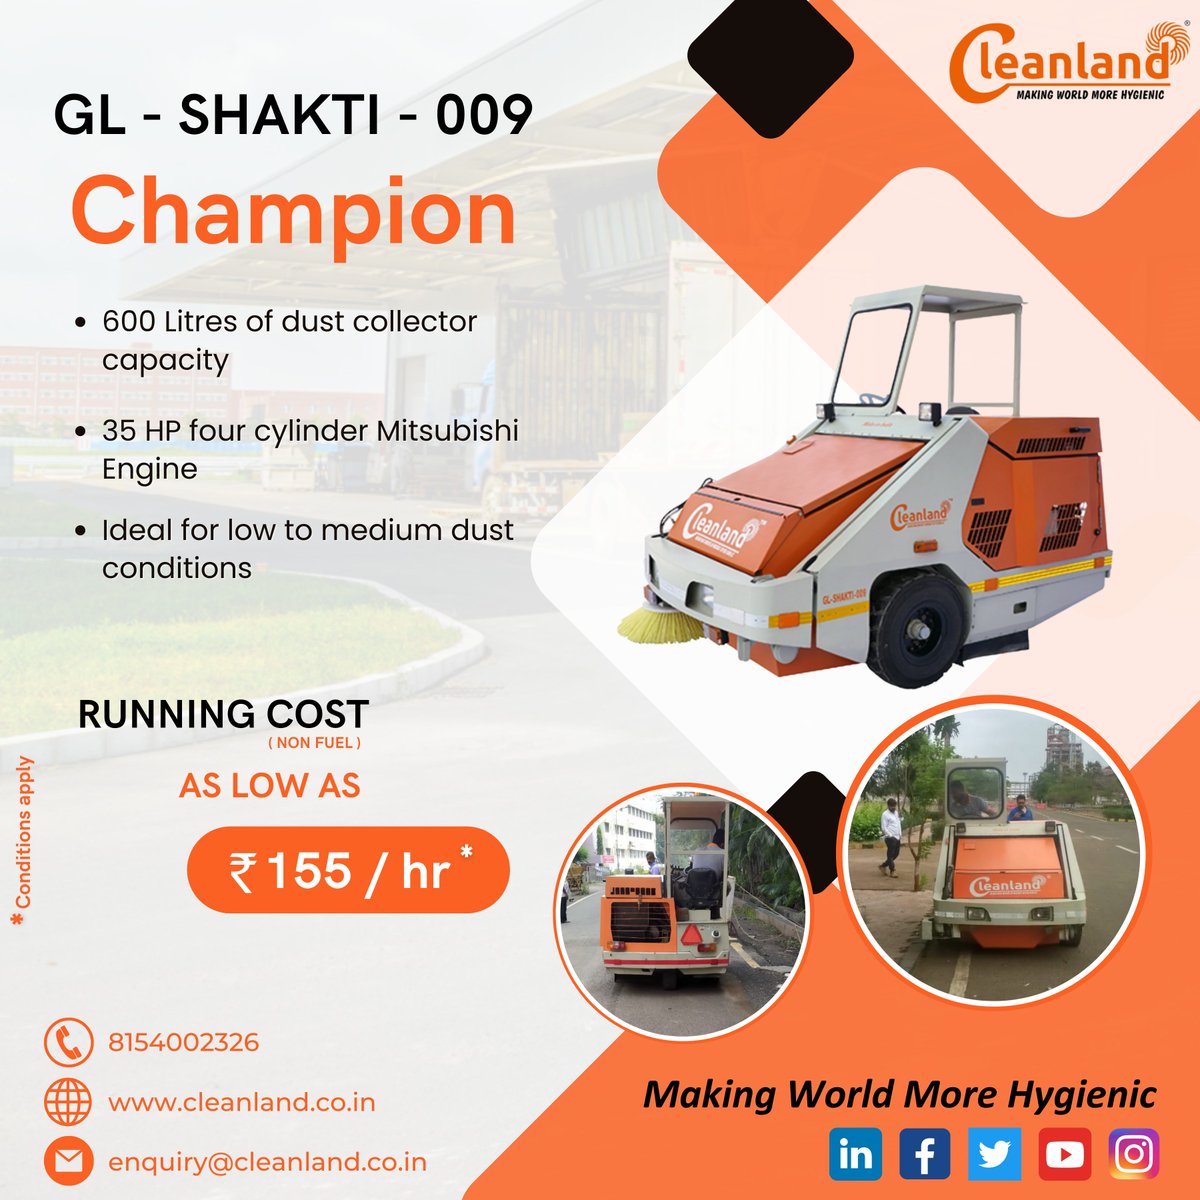 Are you looking for a #reliable cleaning solution for your #universitycampus, #gatedcommunity, or small closed premises? Our #rideonsweeper machines have you covered!

#roadsweeper #industrialcleaning #makeinindia #gatedcommunities #collegesanduniversities #infrastructure